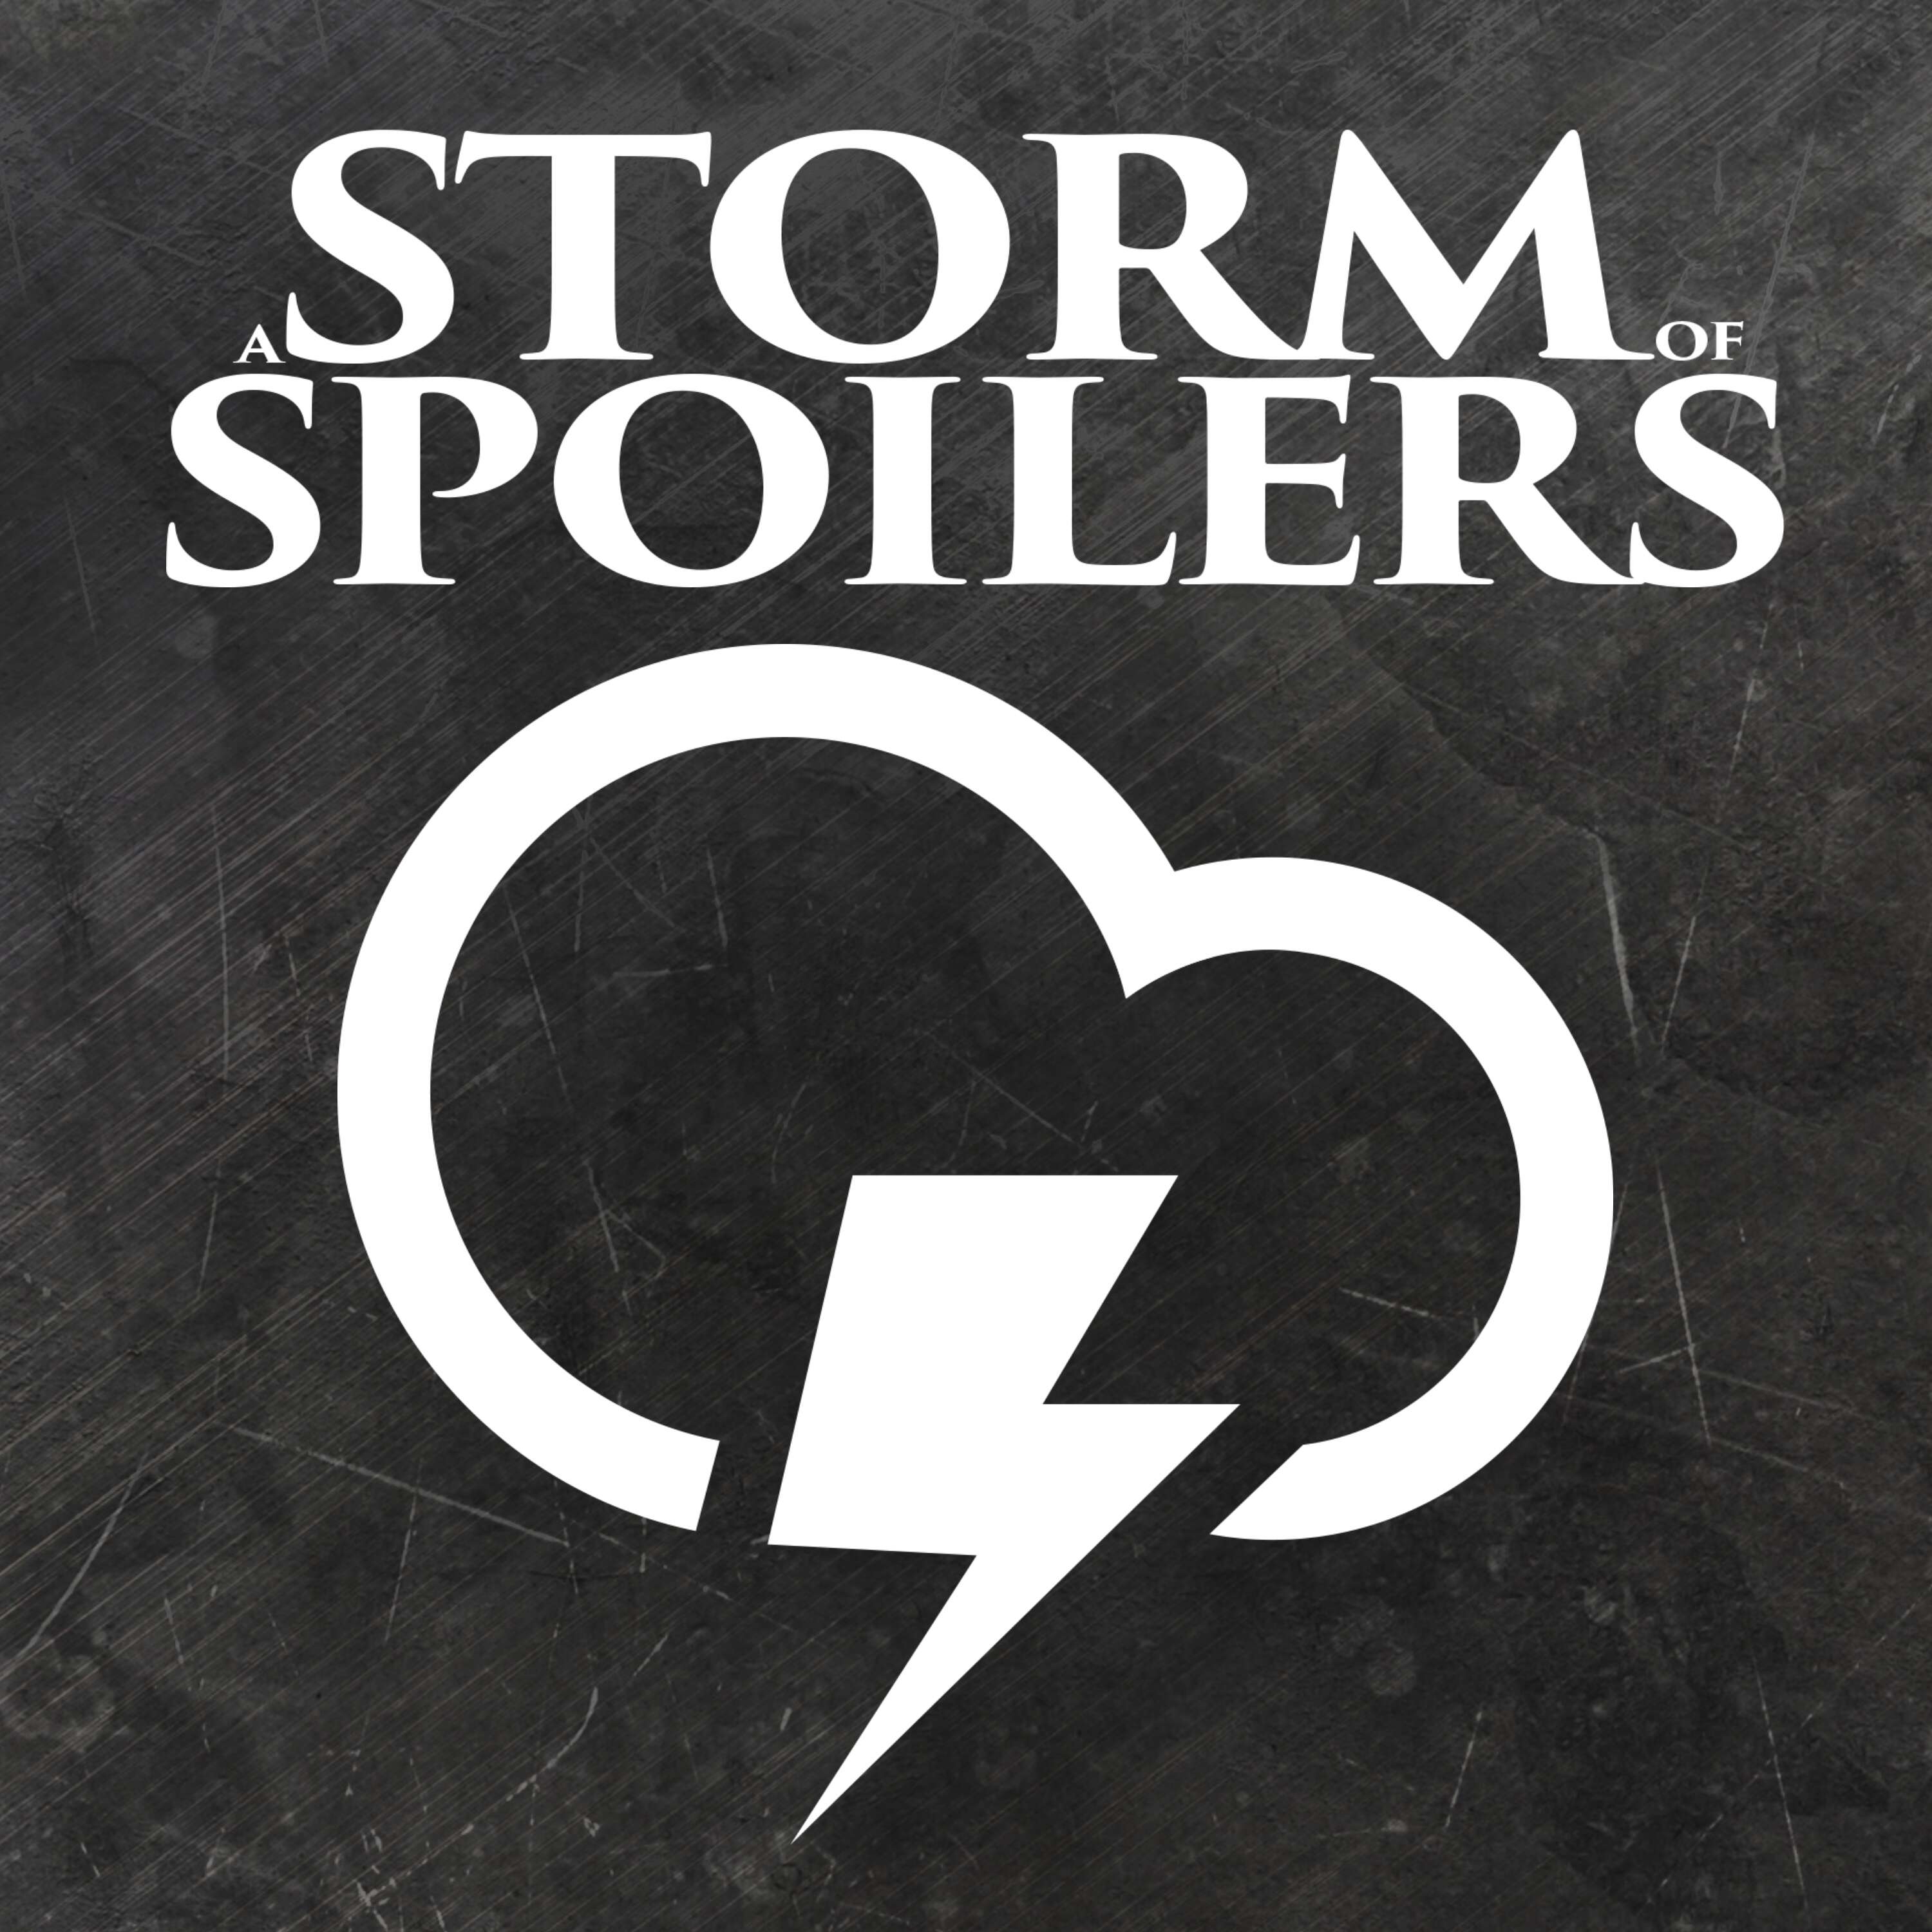 a storm of spoilers